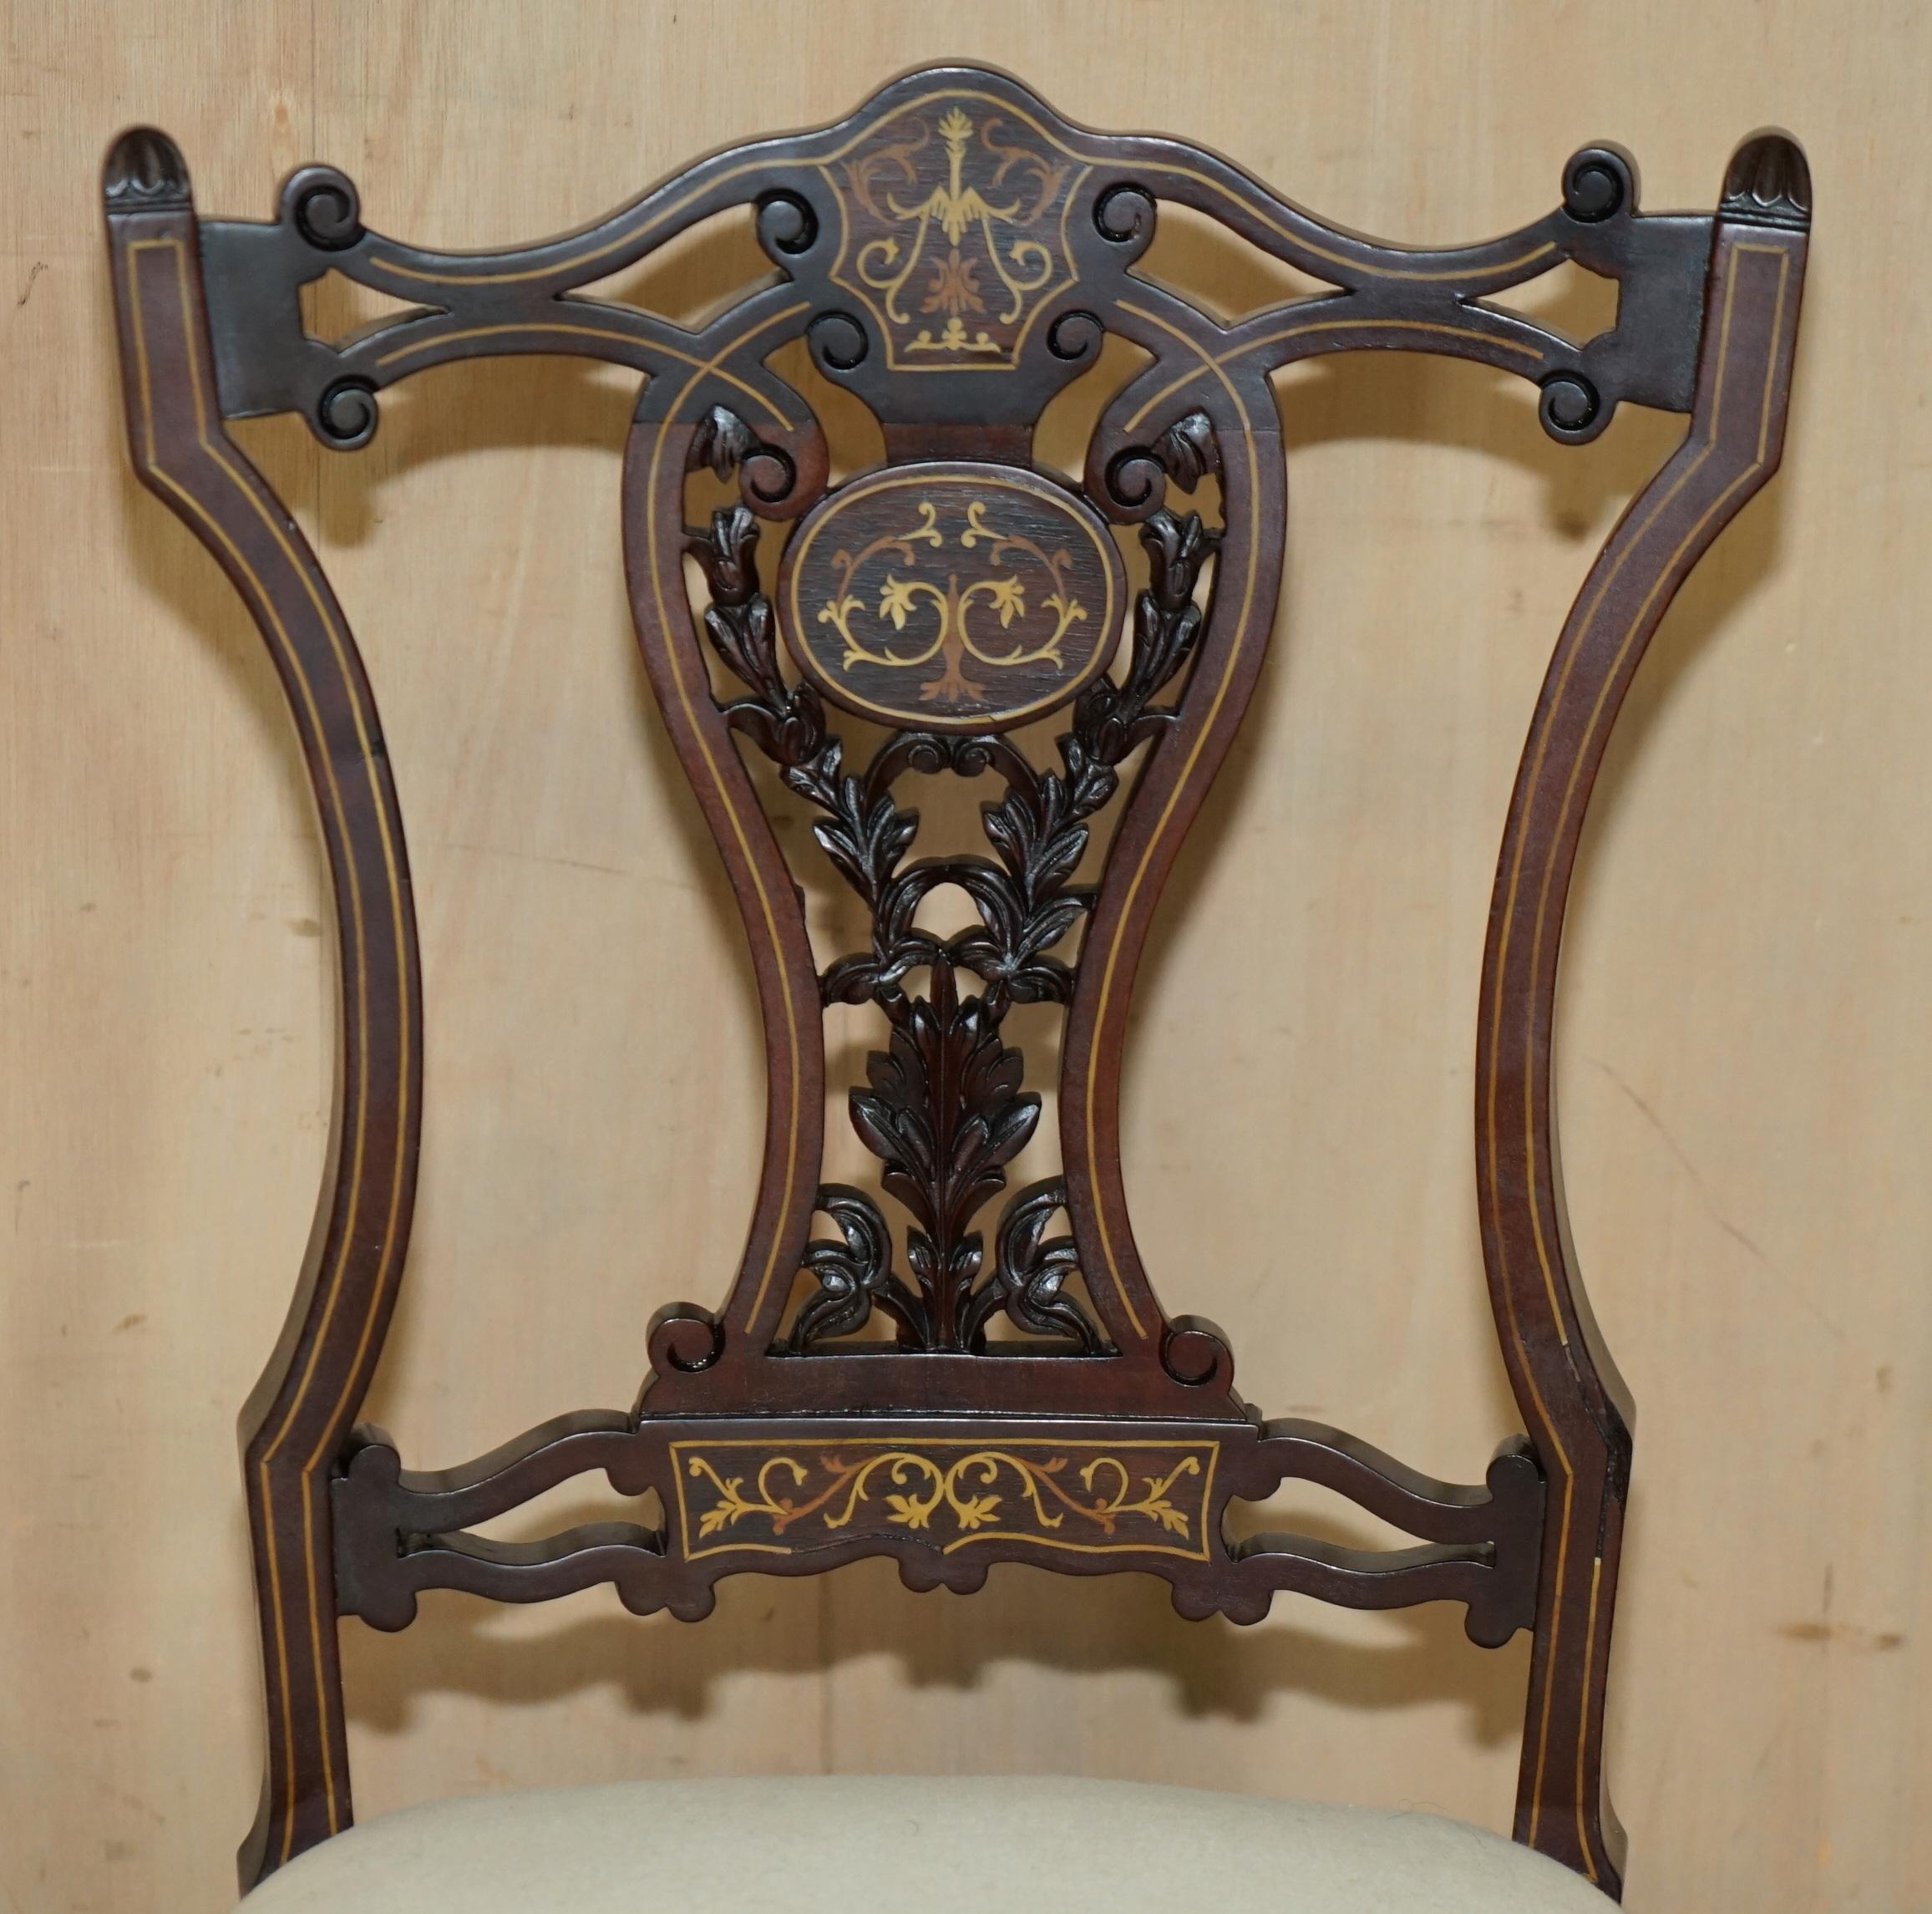 Victorian ANTIQUE VICTORIAN HARDWOOD SALON CHAIR WITH STUNNING INLAiD BACK PANEL For Sale